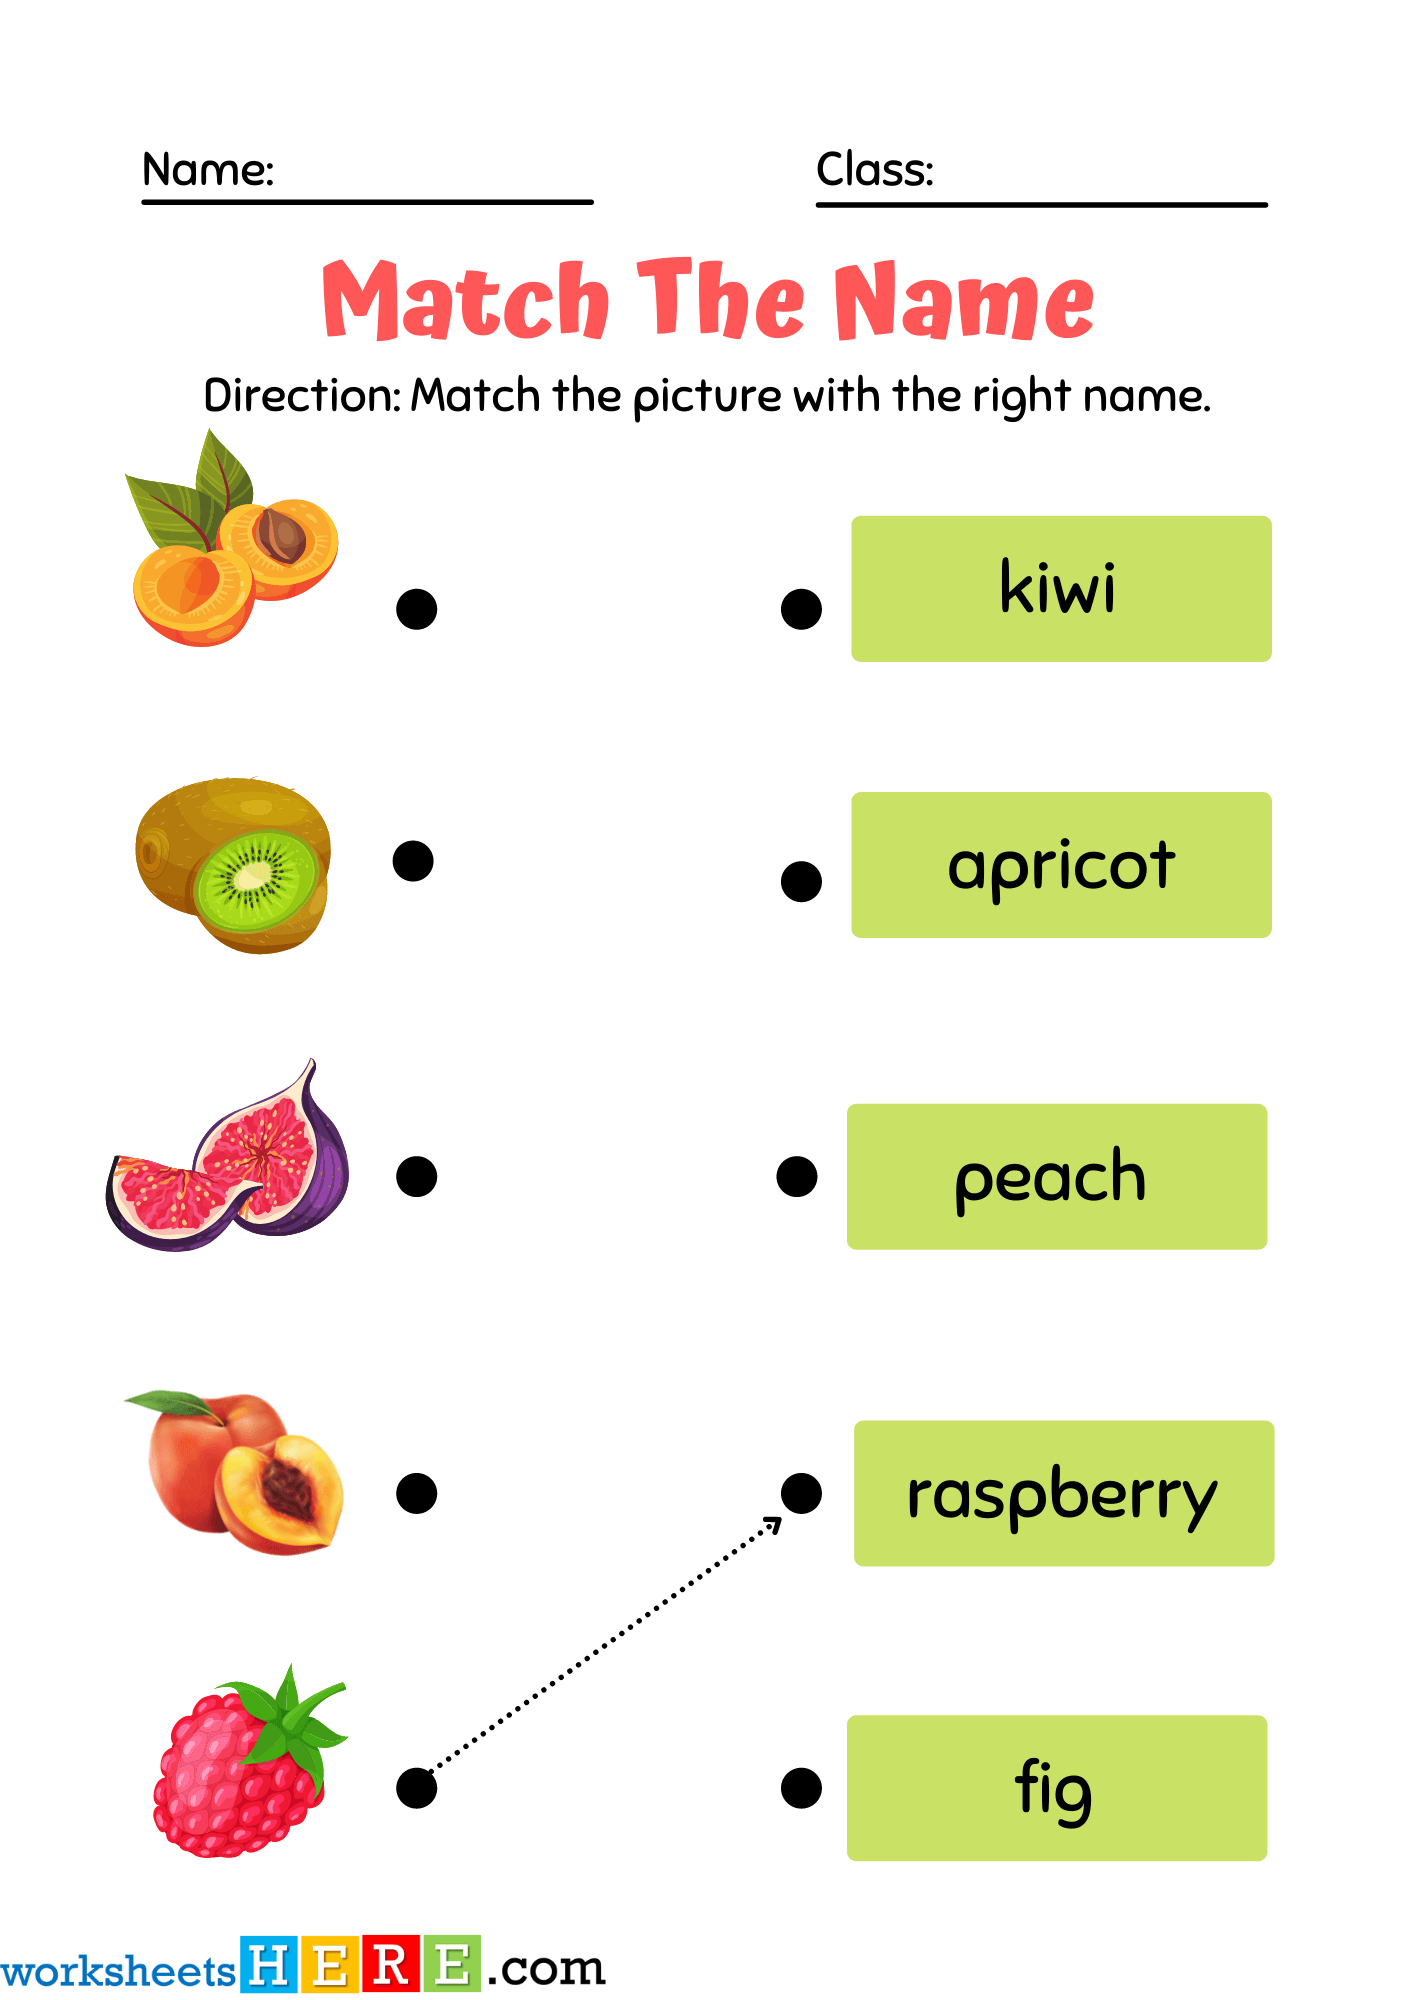 Match The Name with Fruit Pictures PDF Worksheets For Kindergarten